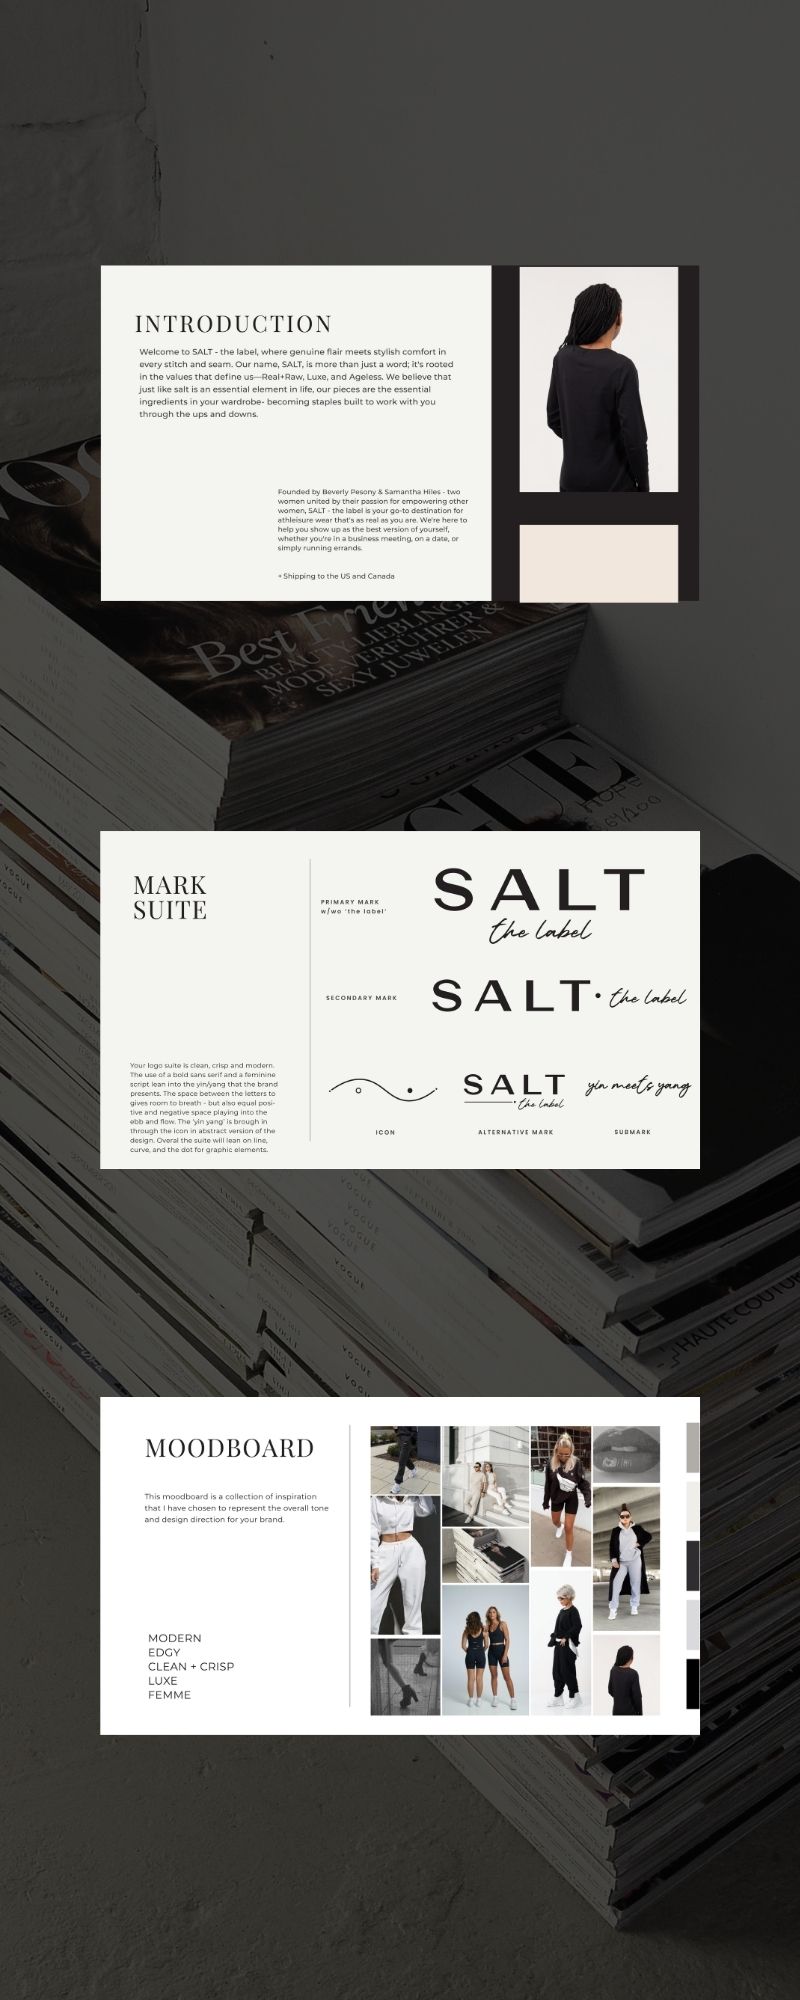 Pages of a brand guide showing the why behind the design for SALT - The Label.